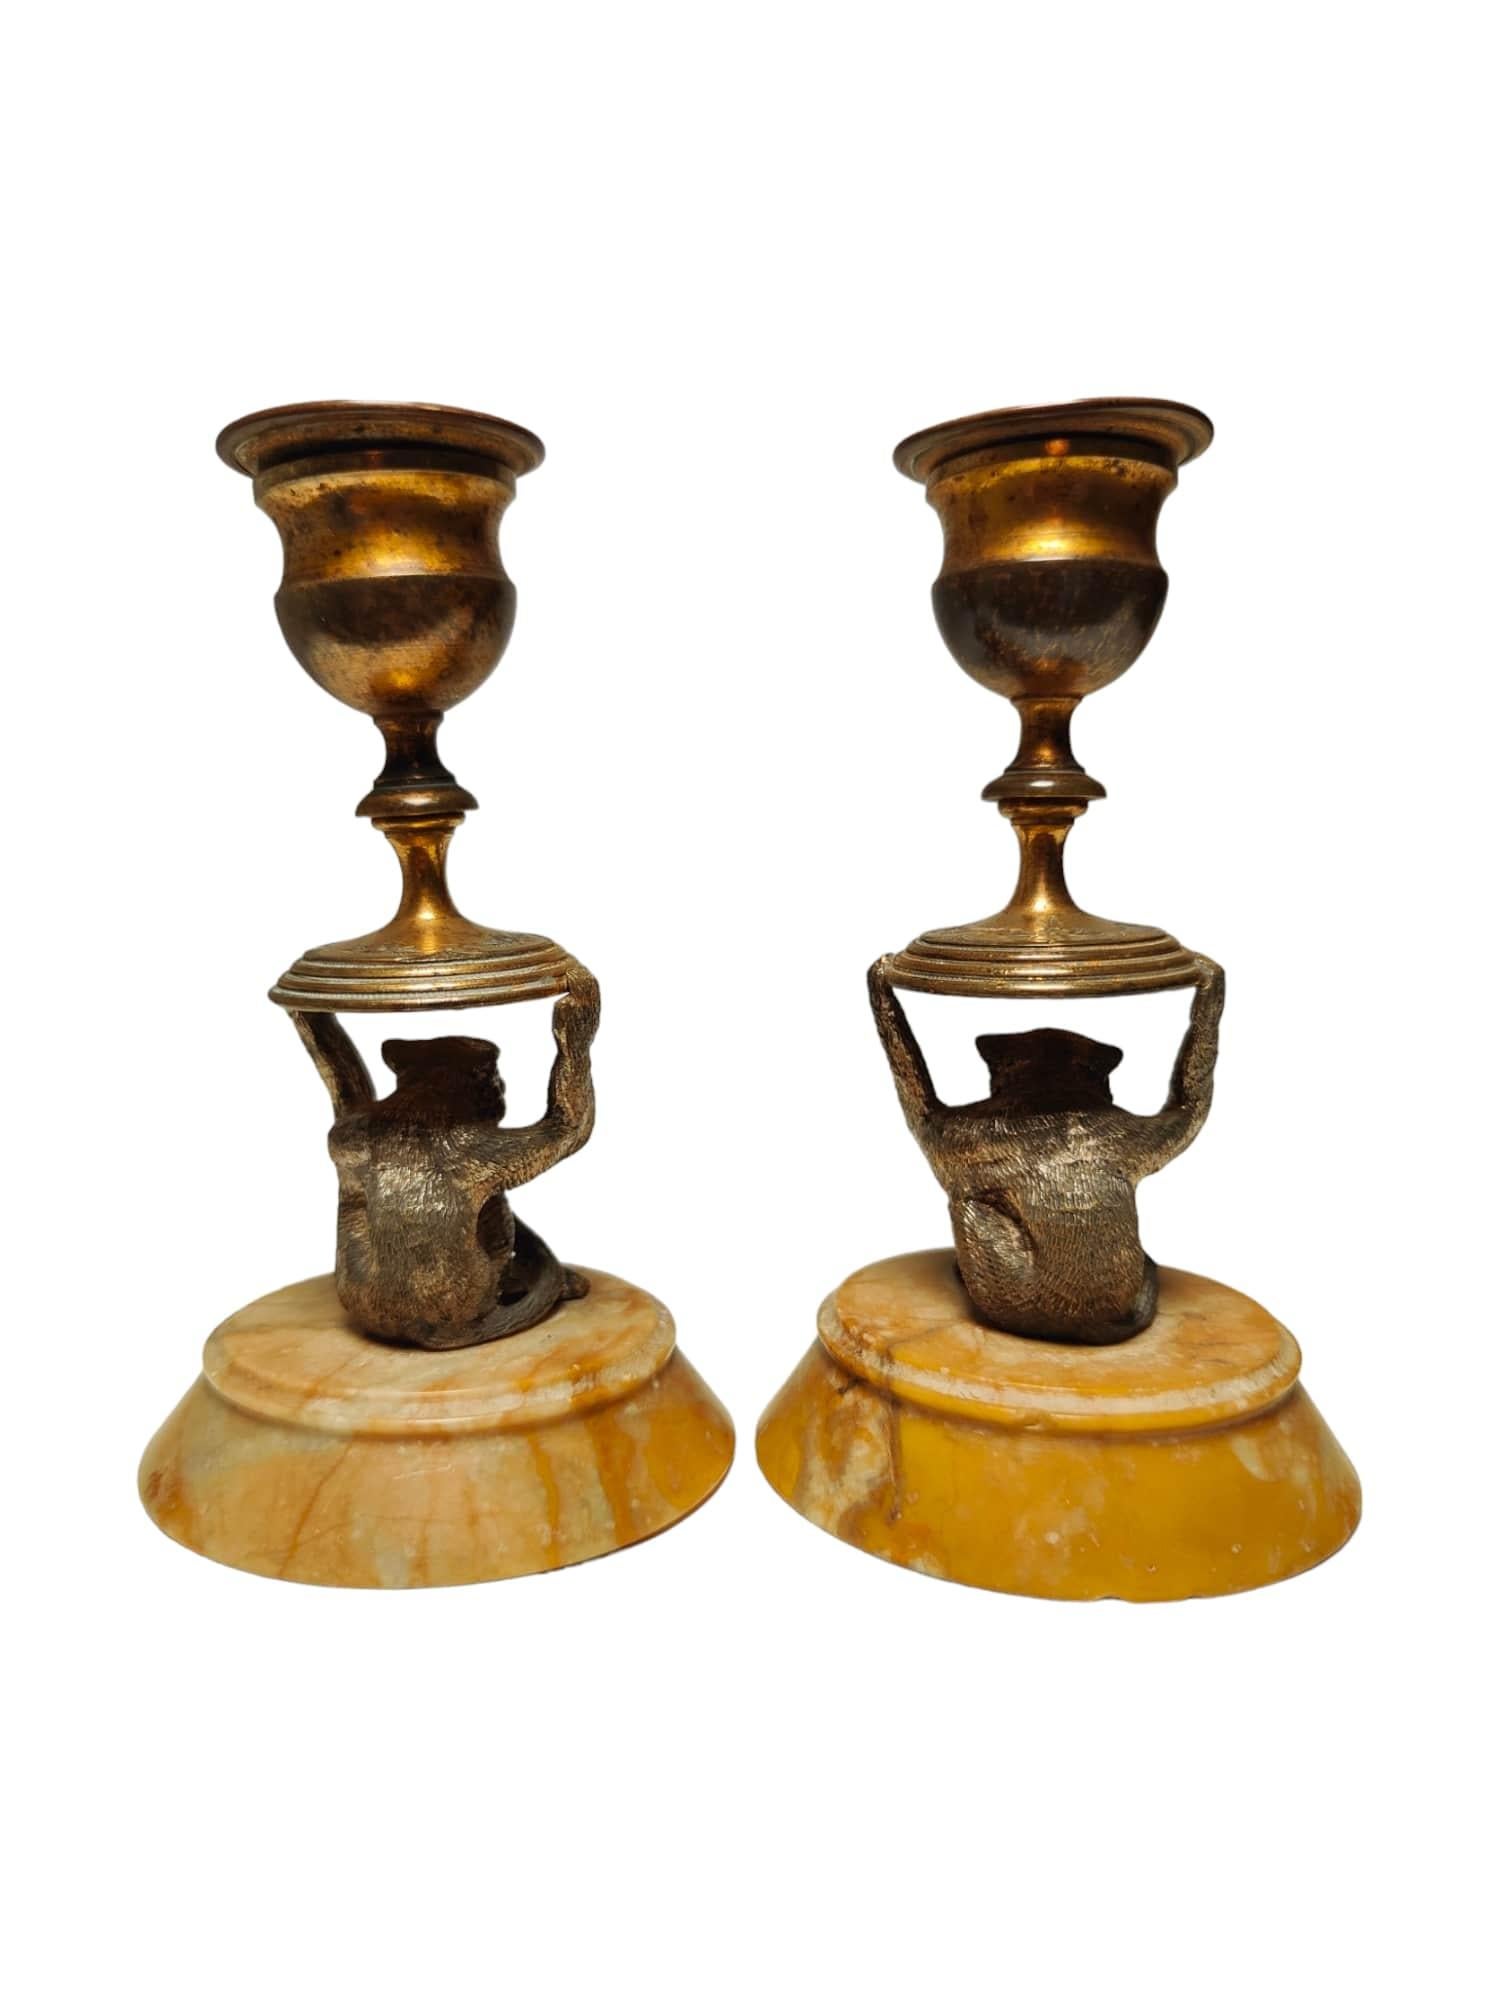 Bronze Pair of Miniature Monkey Candlesticks from the 19th Century For Sale